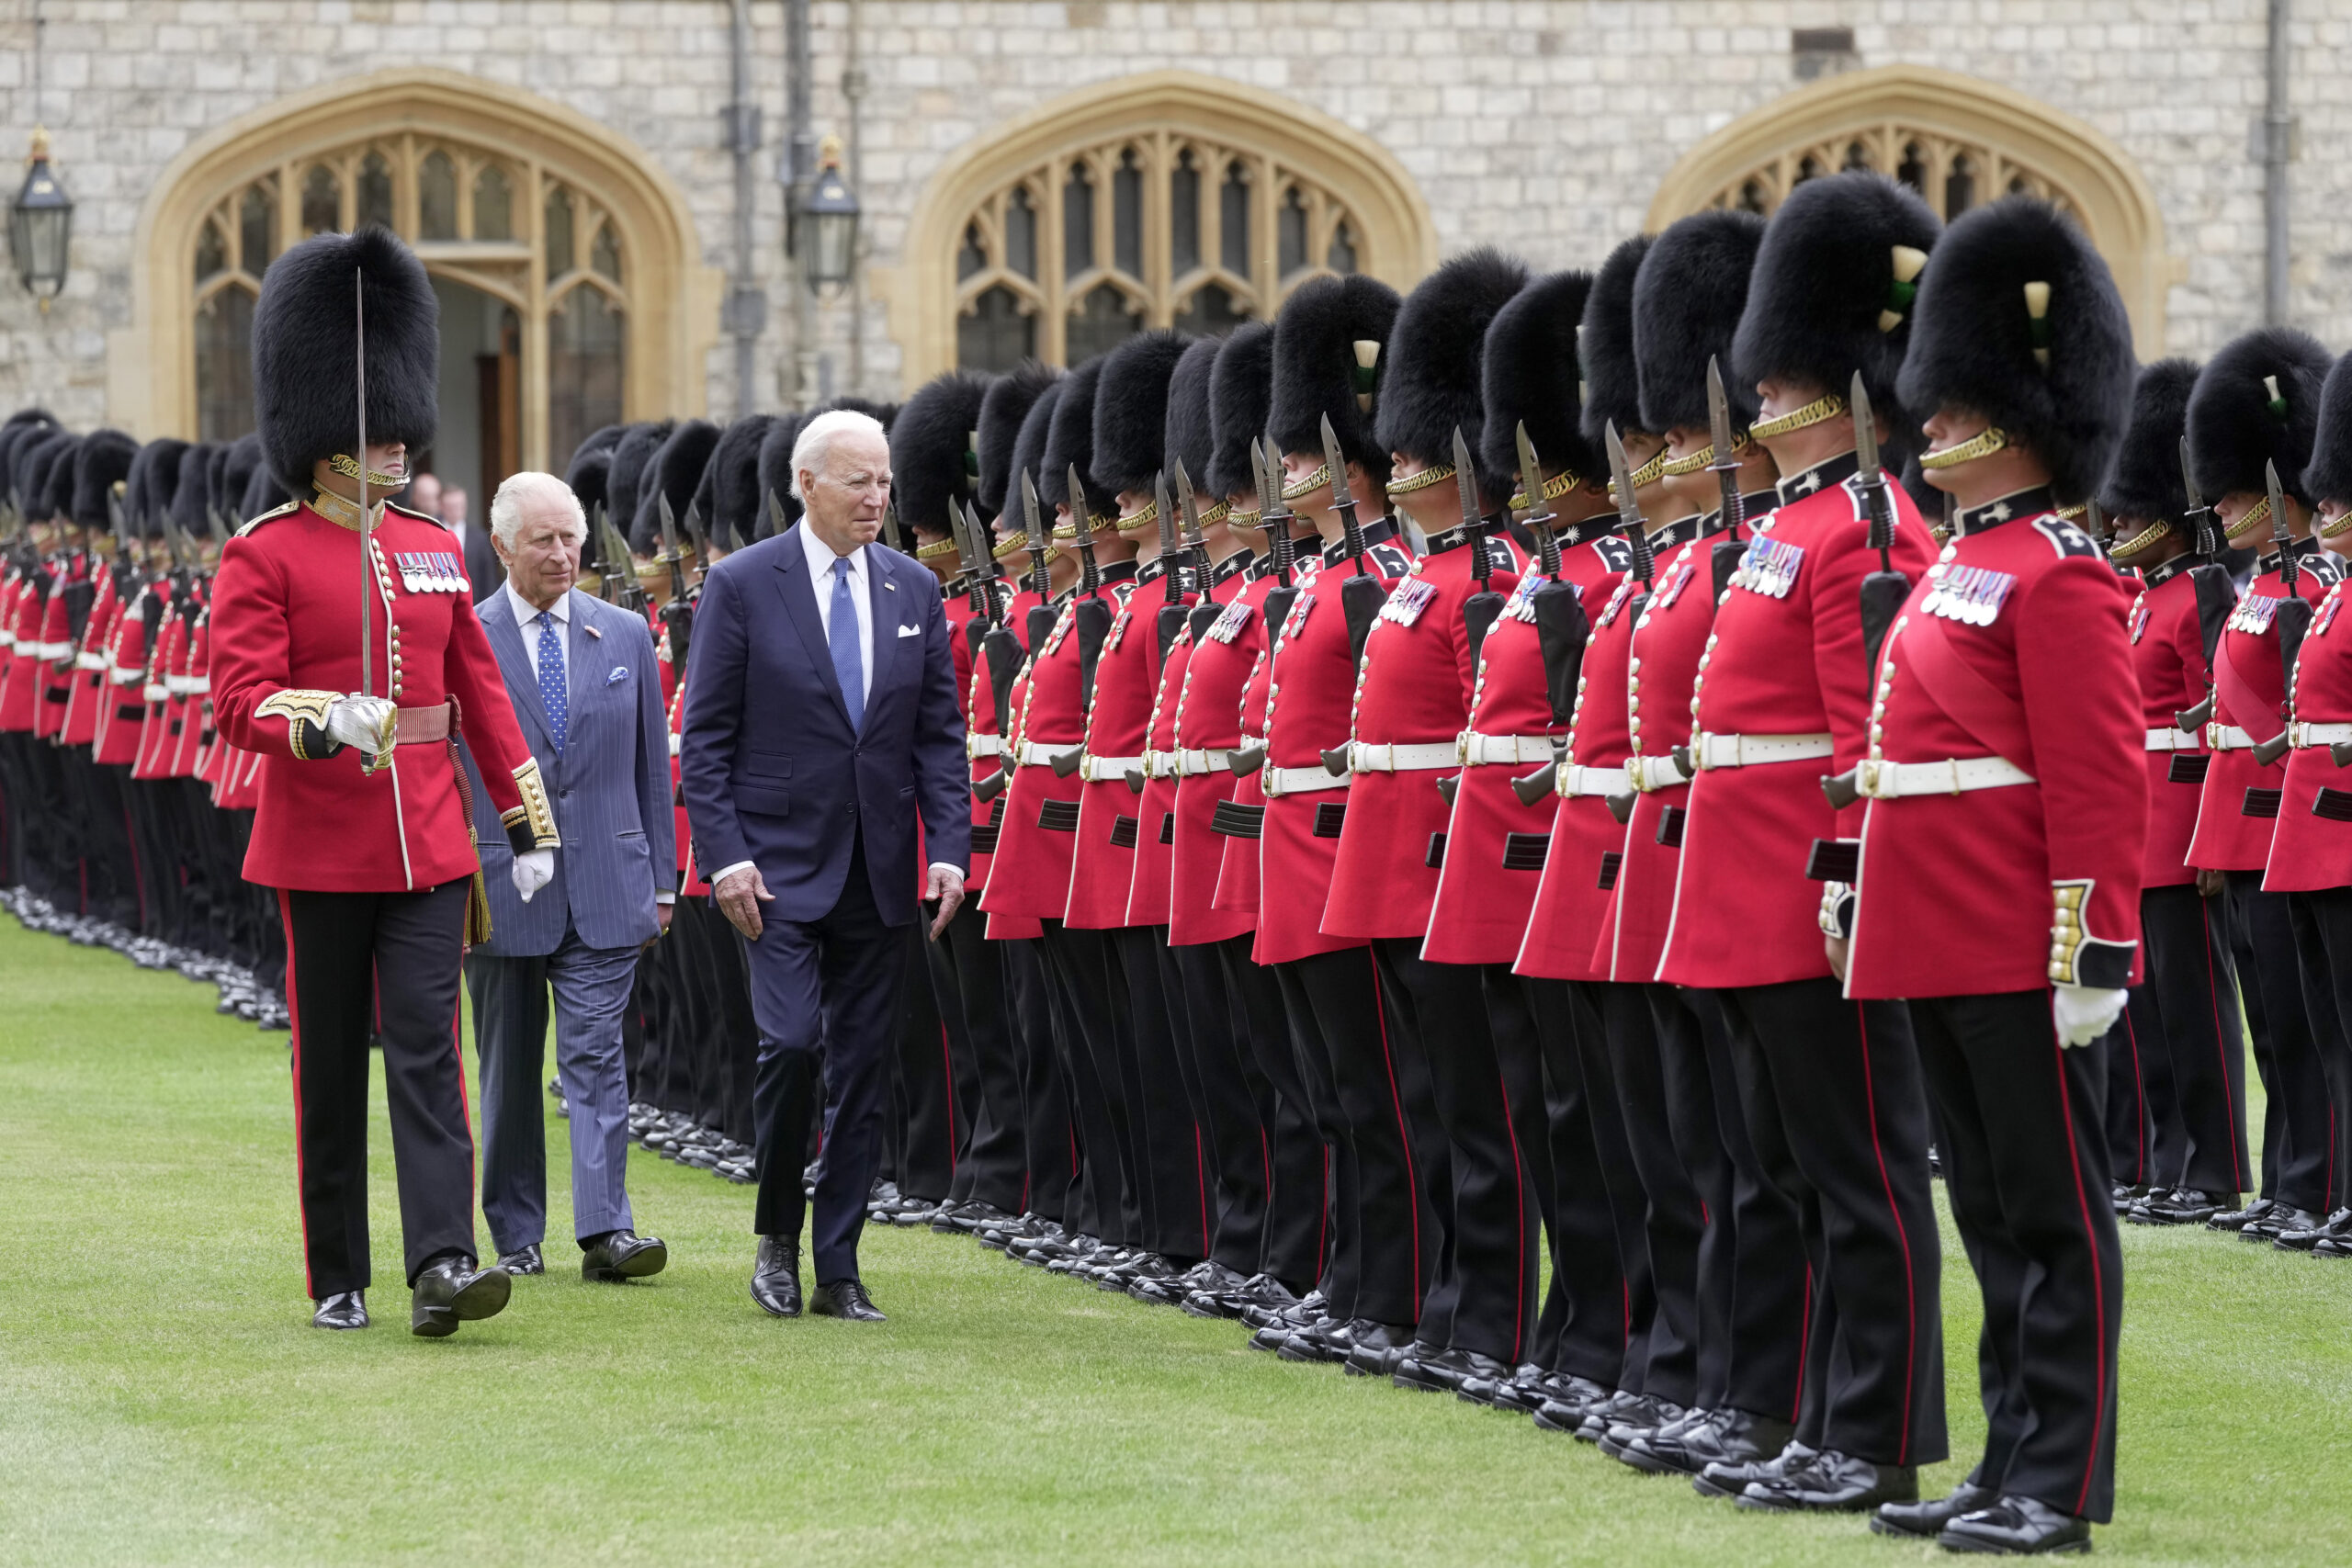 King Charles III extends olive branch to Prince Harry and Meghan Markle during Joe Biden's visit